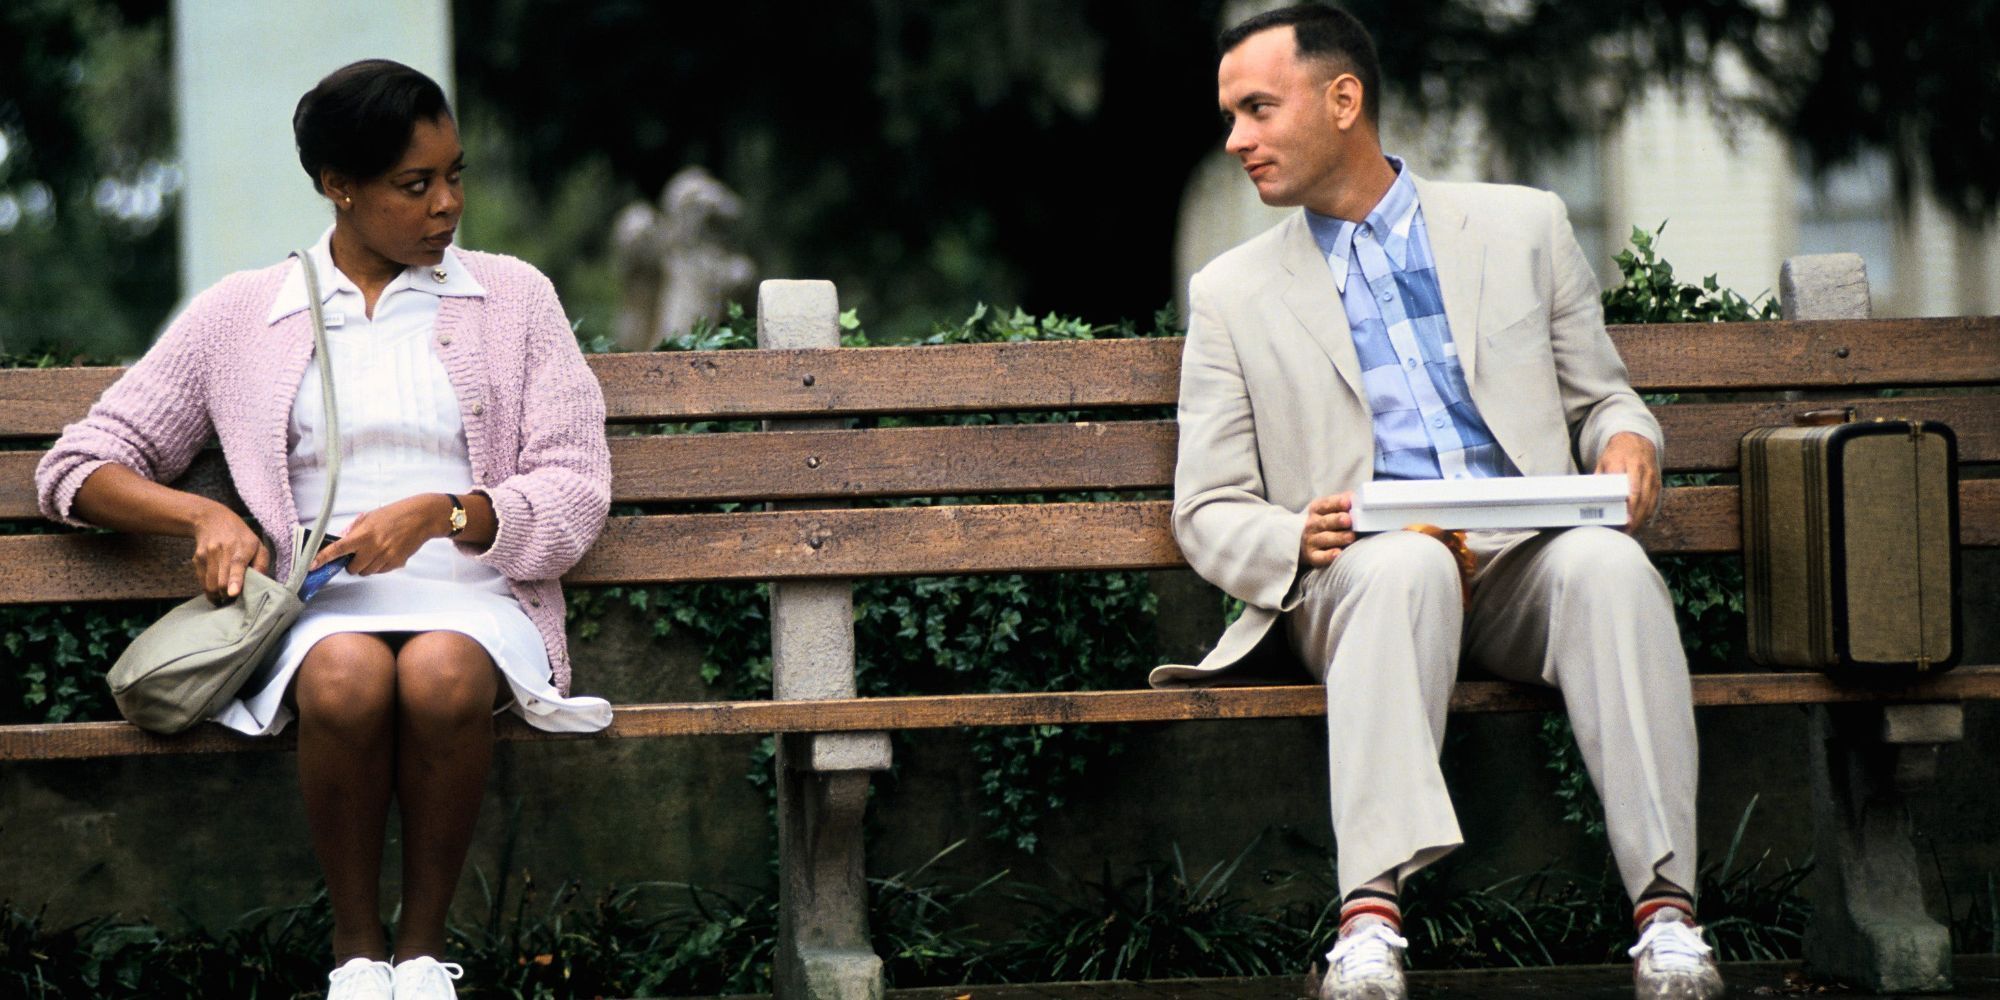 Forrest sitting next to a woman in Forrest Gump.